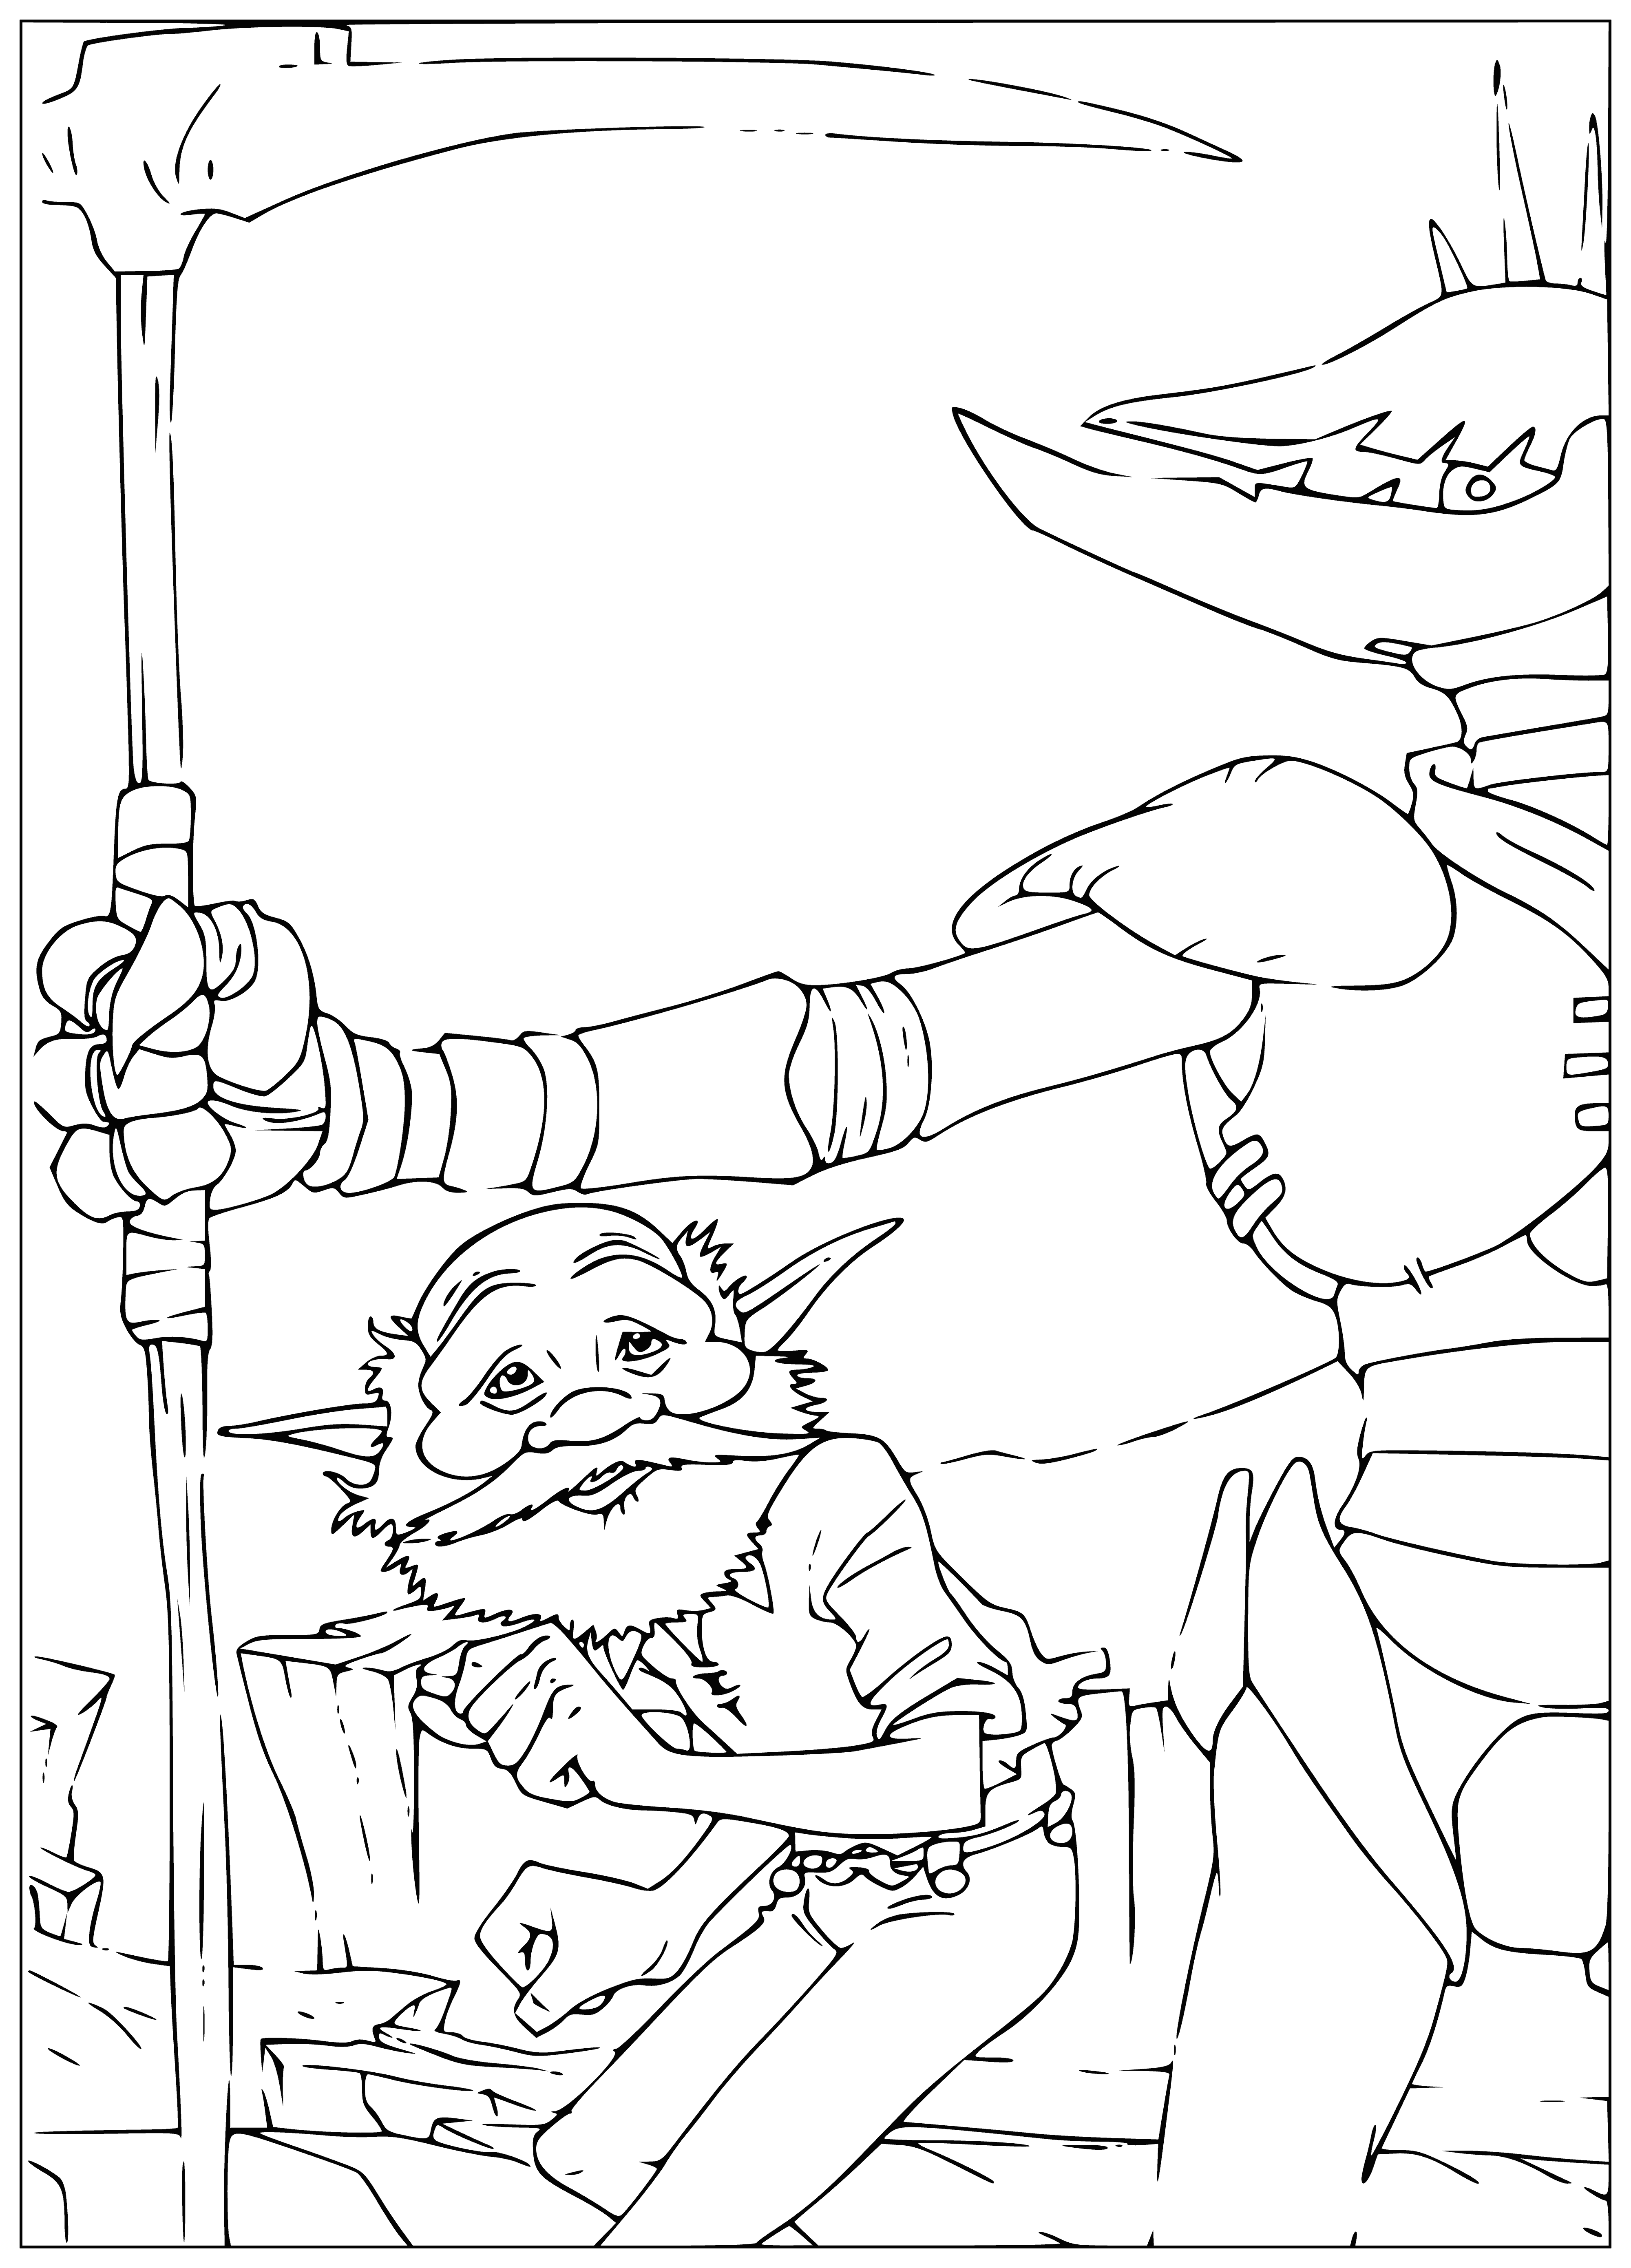 coloring page: Grandpa is in a glass cage, shackled, wearing a tattered blue robe and looking very weak and frail.